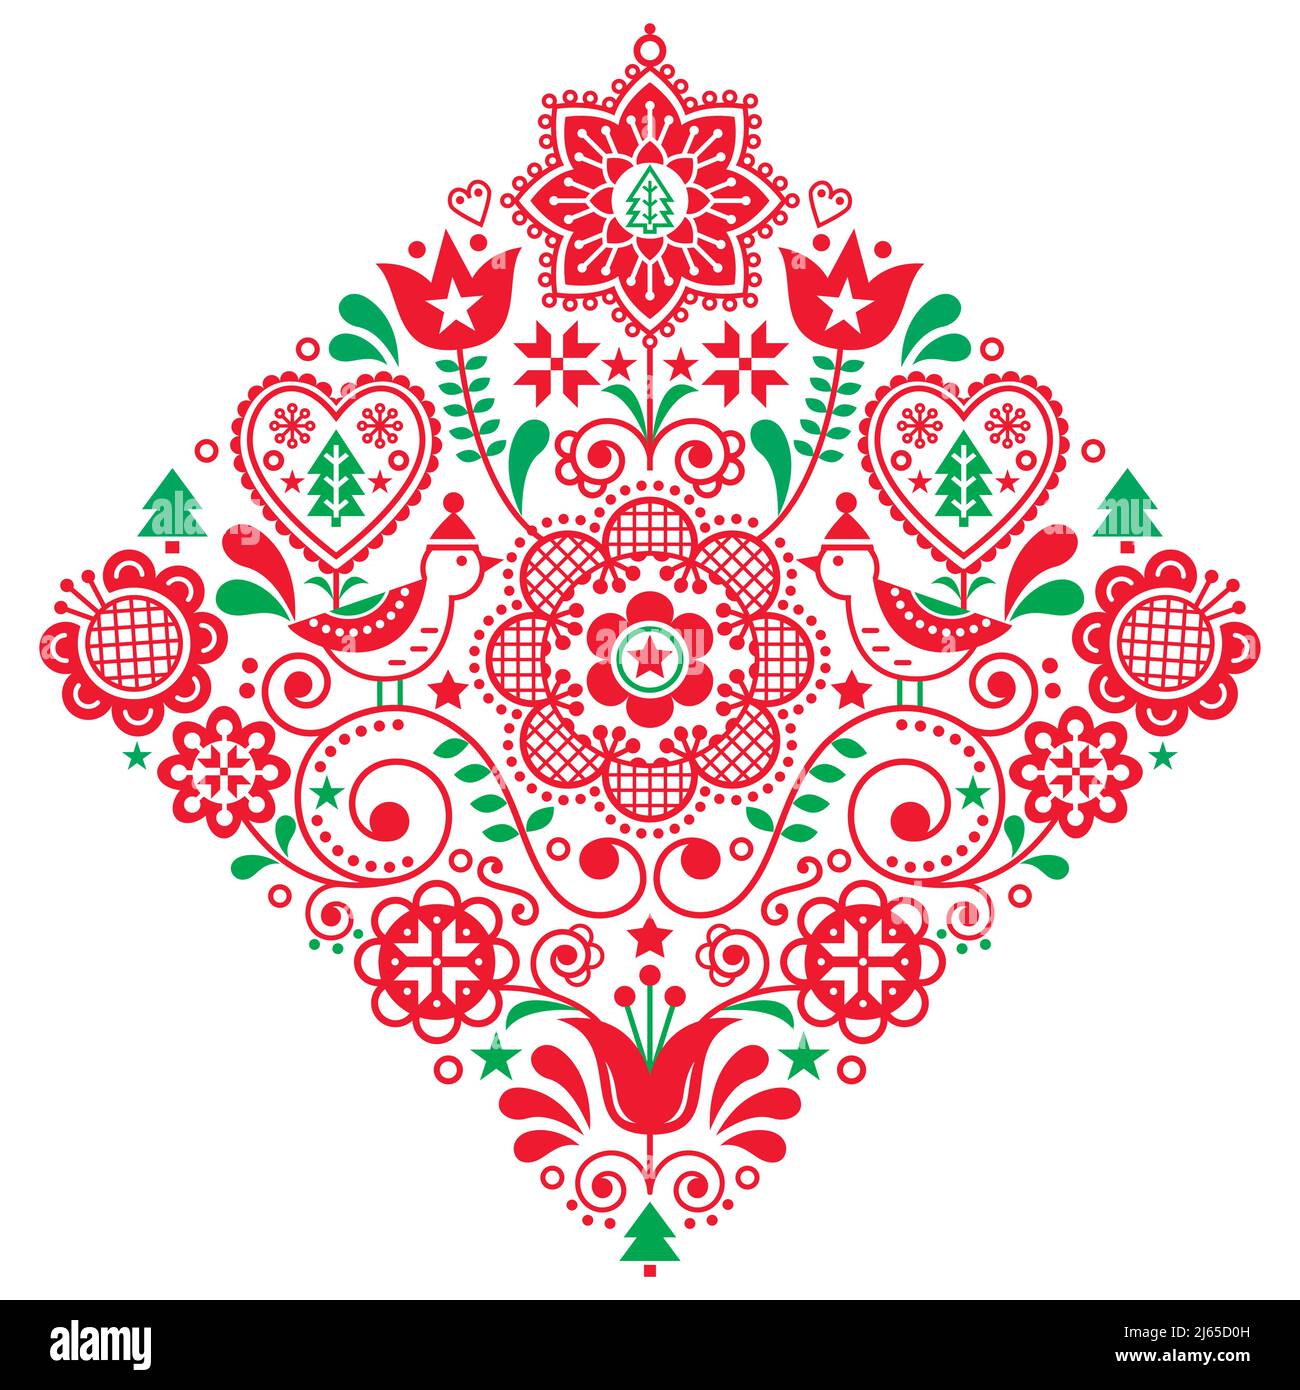 Scandinavian Christmas folk art retro square vector pattern with birds in hats, snowflakes and Xmas tree in red and green on white background Stock Vector